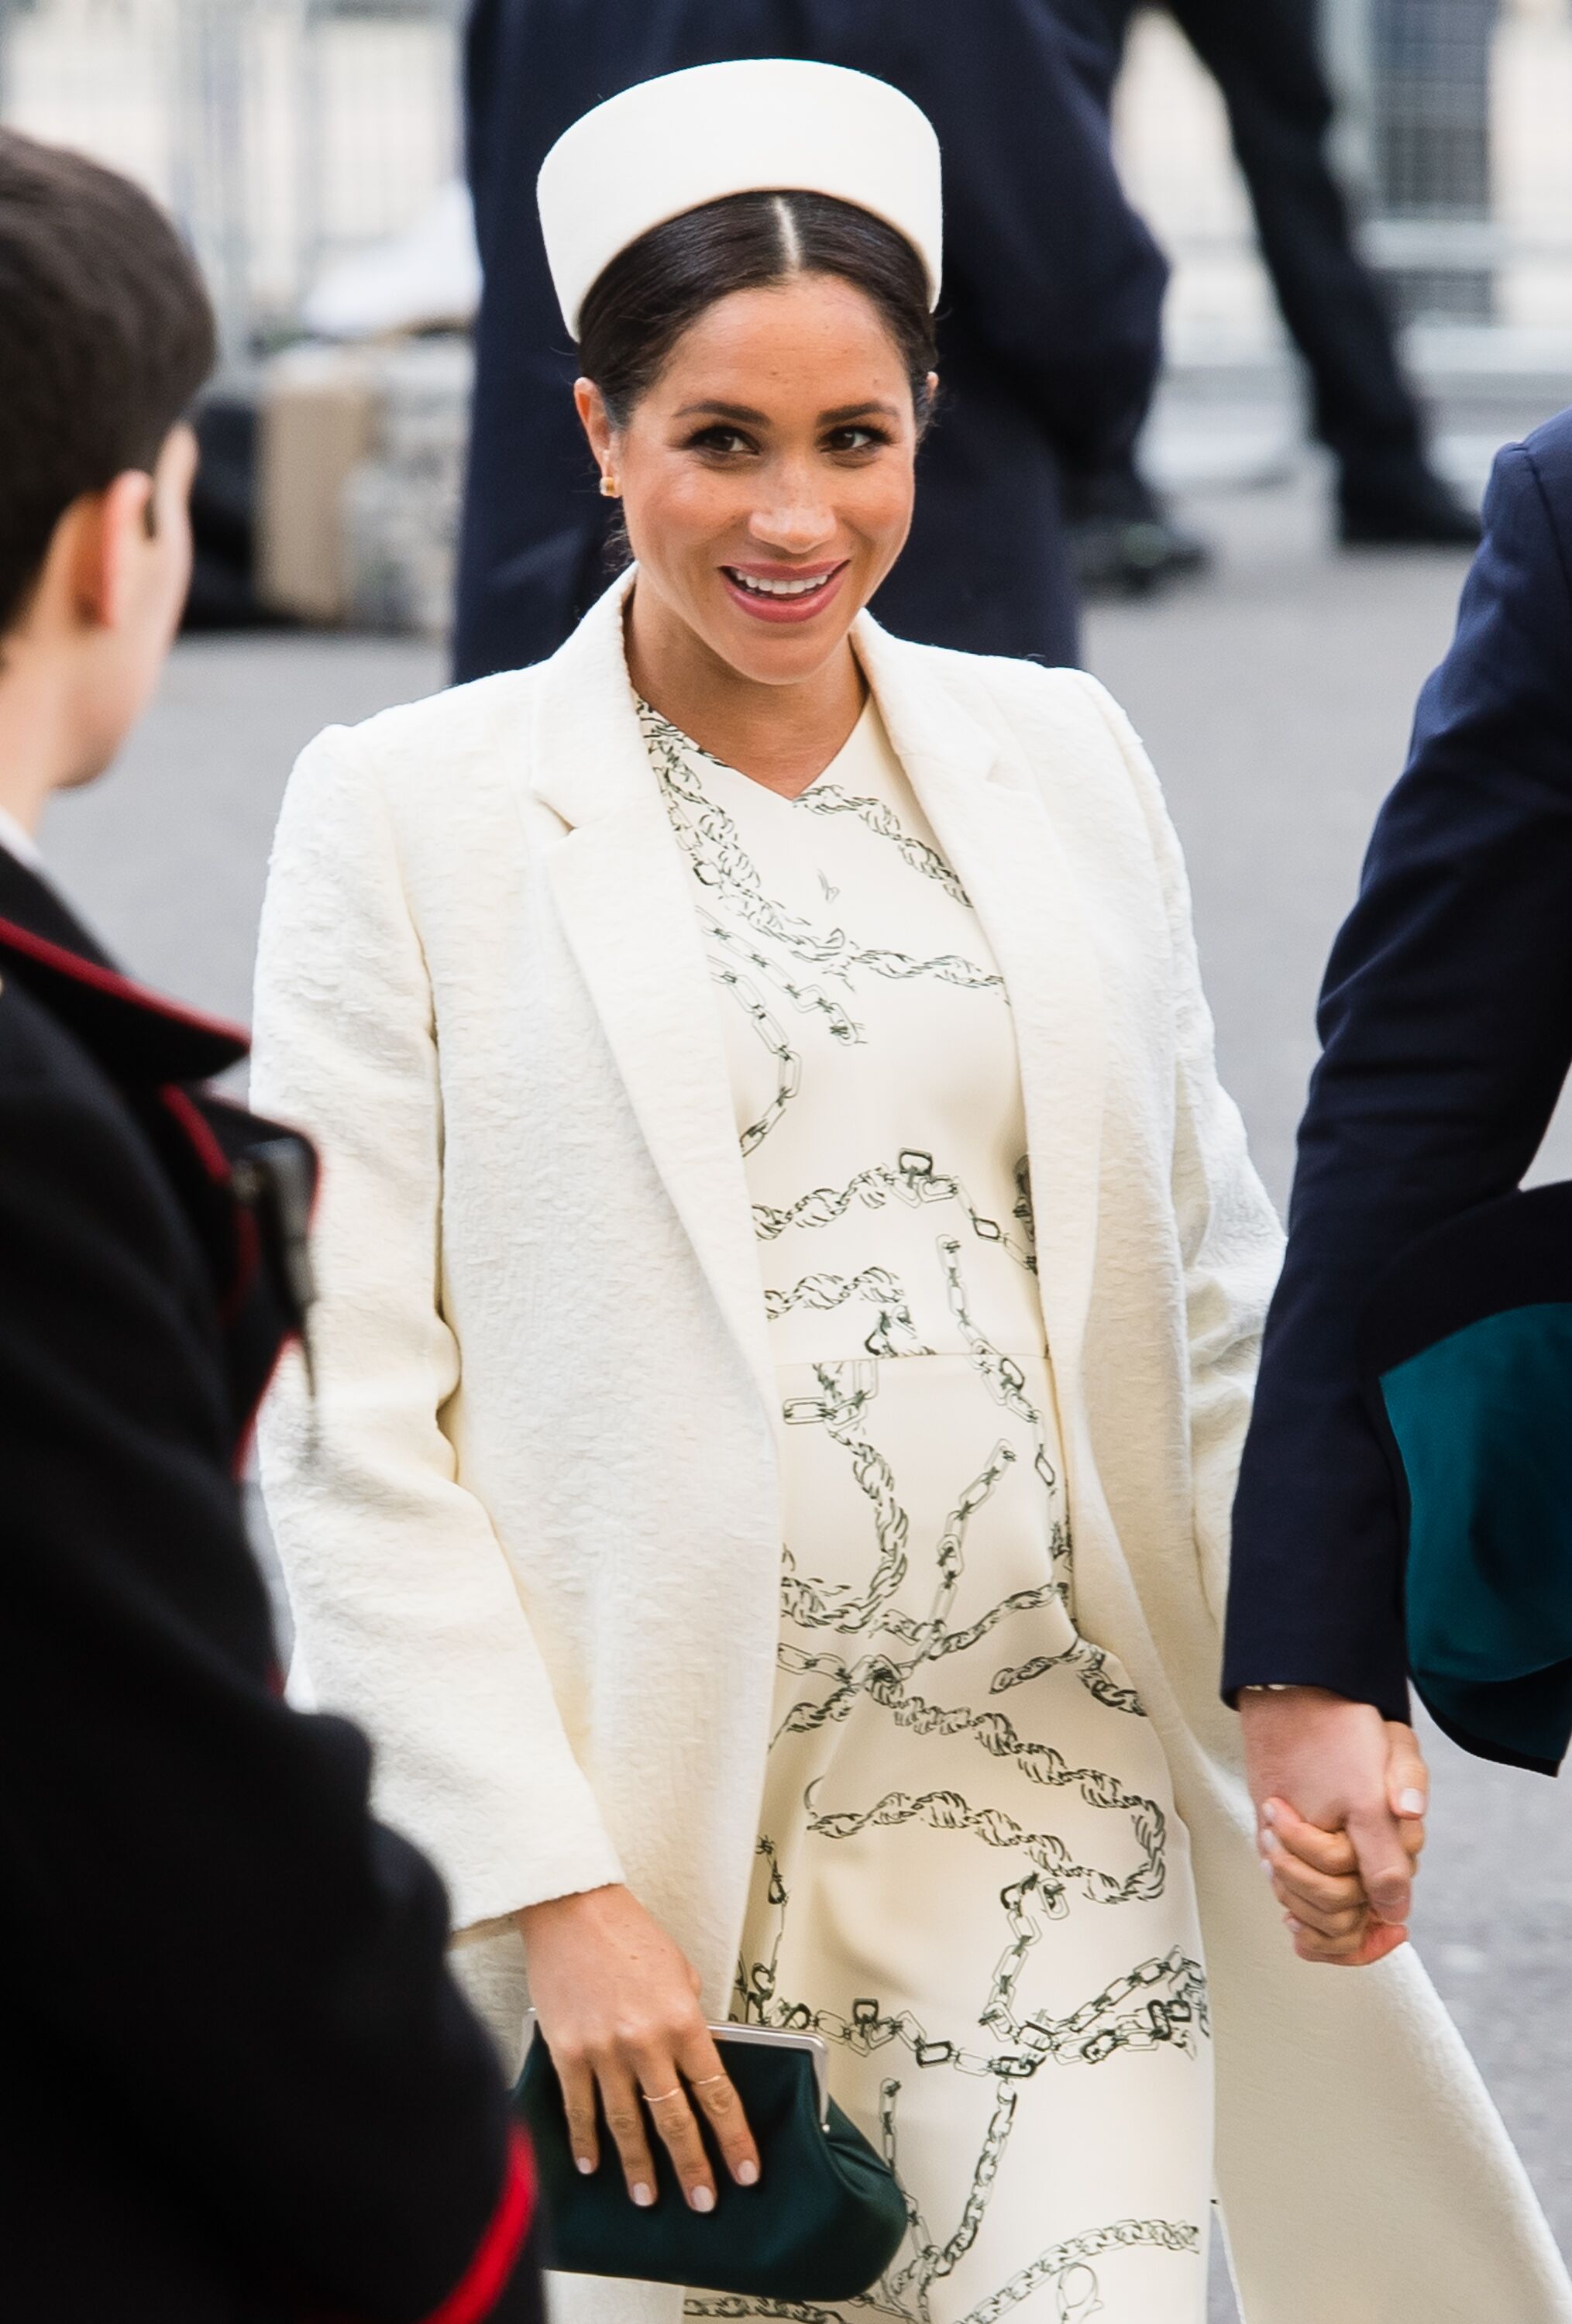 Meghan Markle attends the Commonwealth Day service at Westminster Abbey on March 11, 2019 in London, England. | Source: Getty Images